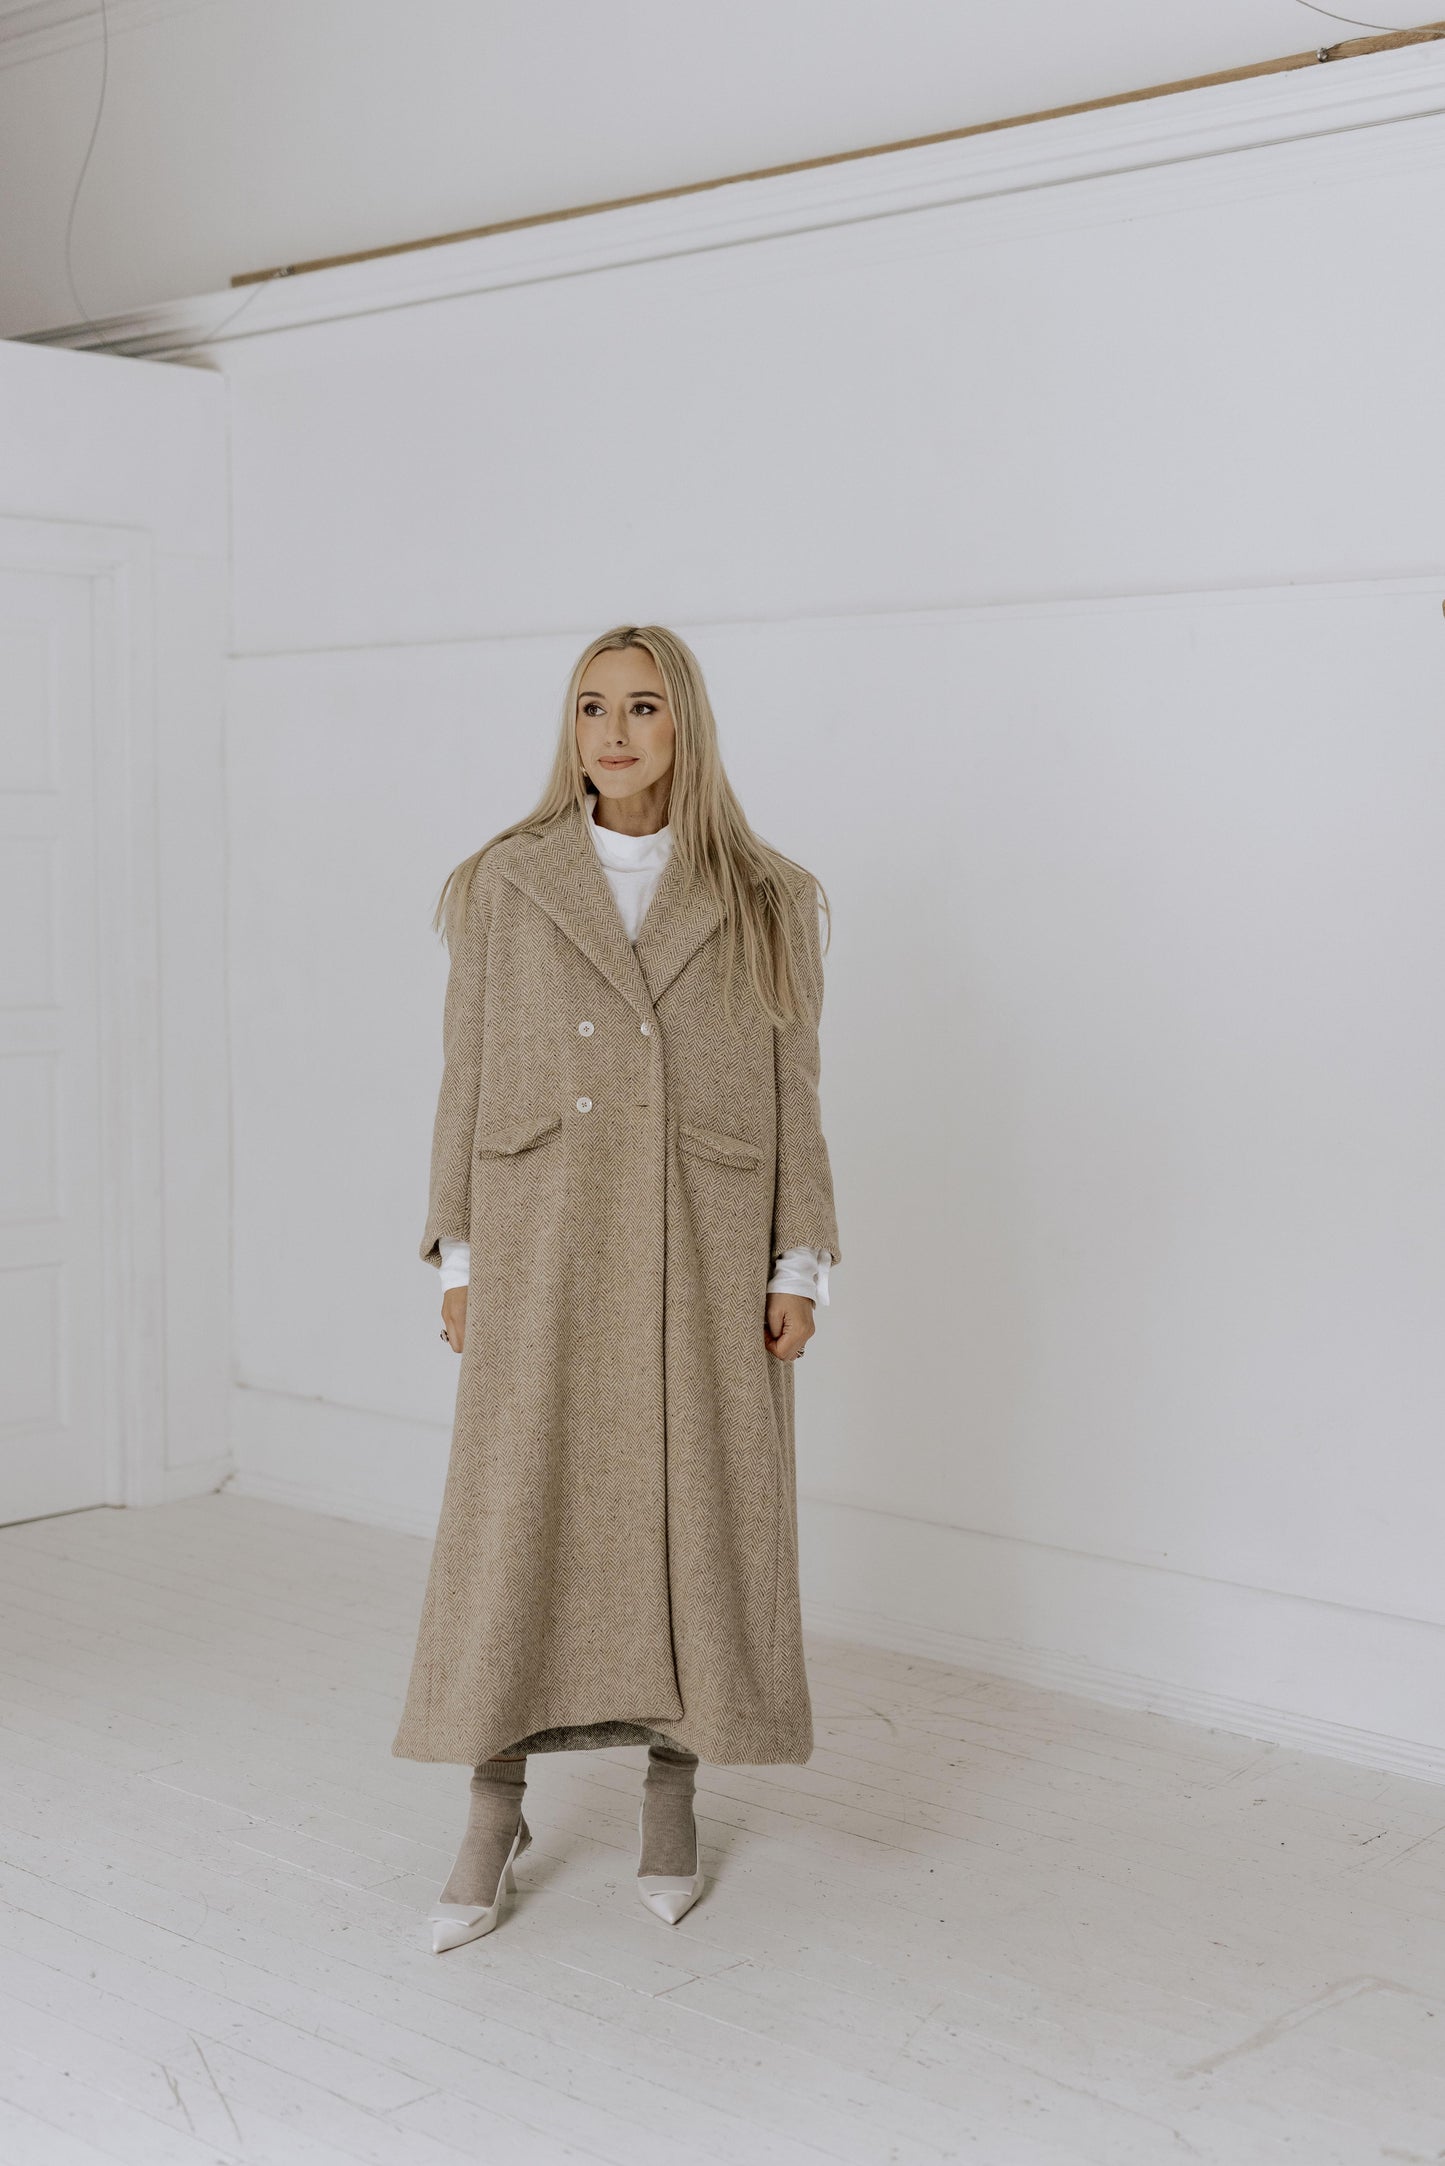 THE AMY COAT | We are so delighted to introduce a big new step for us as a brand by introducing Donegal Tweed to our core collection. An expansion of our deep love and passion for Irish textiles and keeping our rich heritage alive- originating in Co Doneg